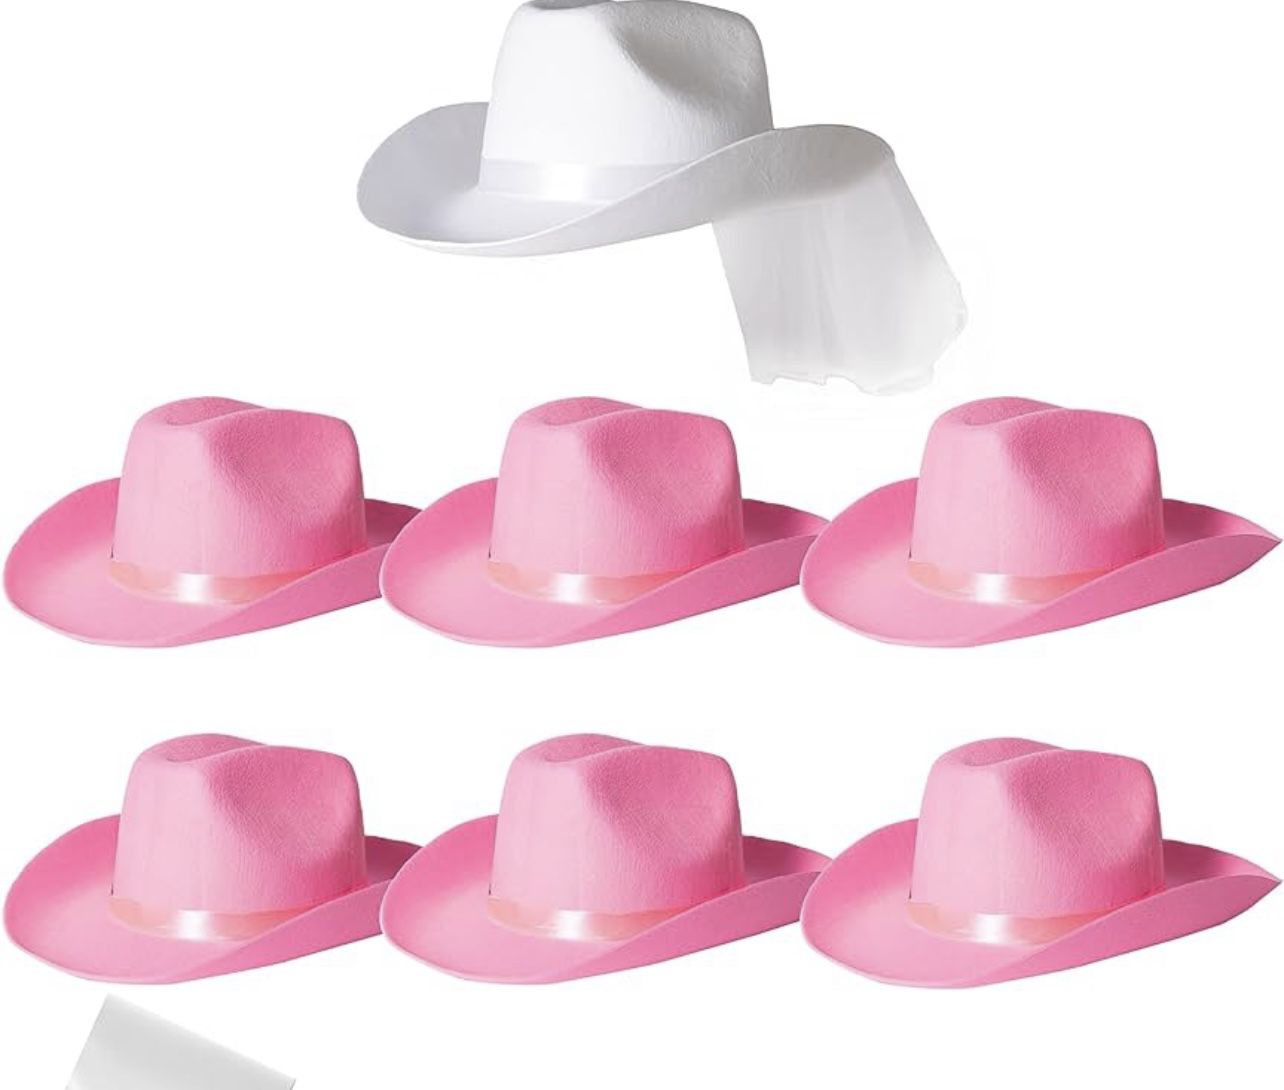 Cowgirl Hats 